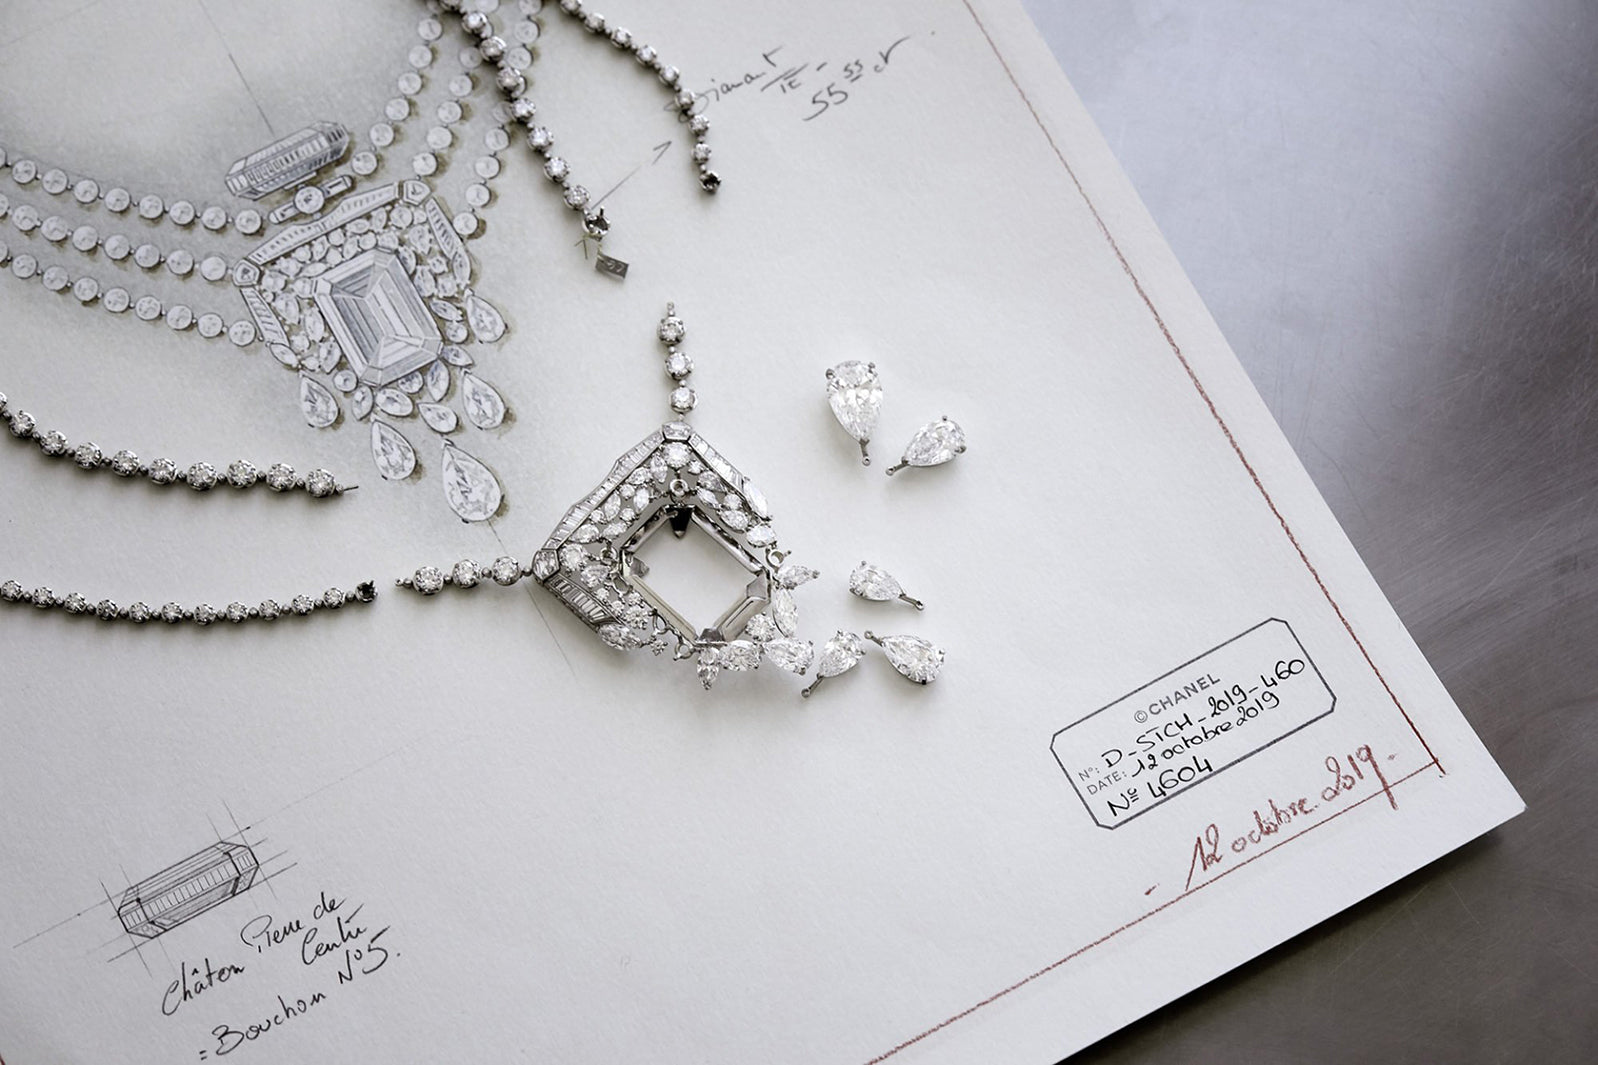 CHANEL USES A 55.55-CARAT D-FLAWLESS DIAMONDTO CELBRATE THE CENTENARY OF  ITS ICONIC PERFUME